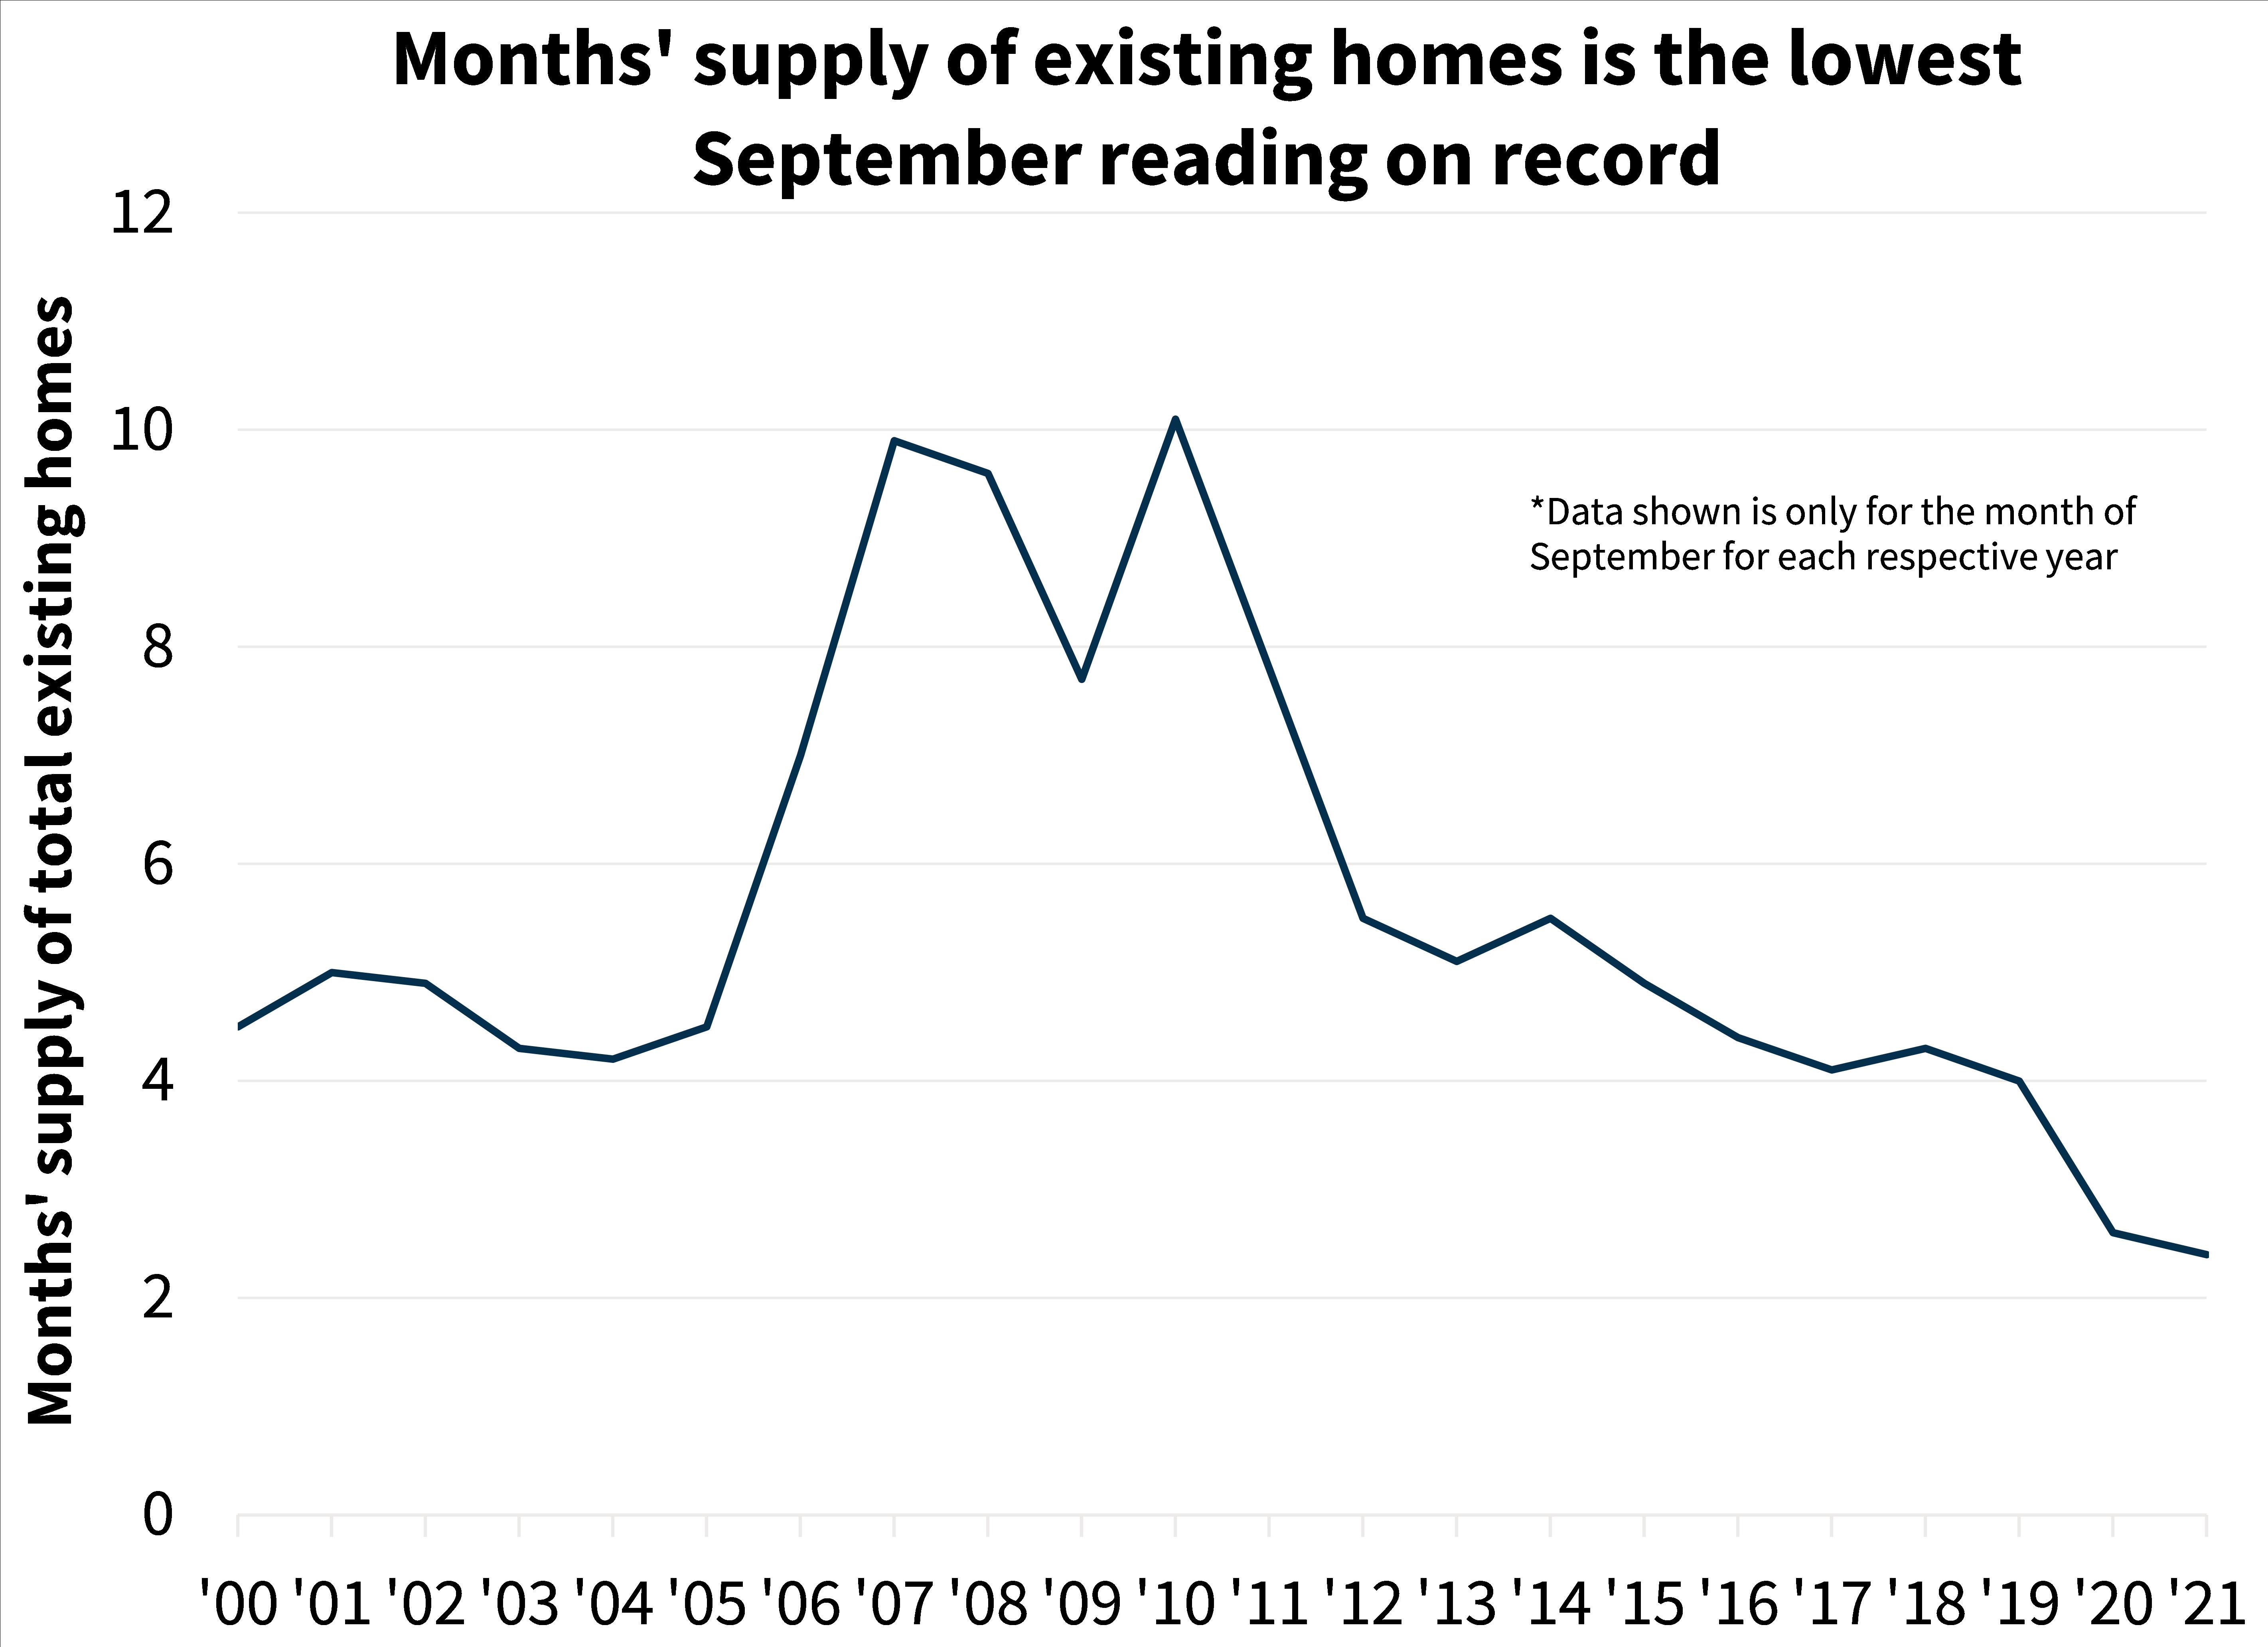  Months’ supply of existing homes is the lowest September reading on record